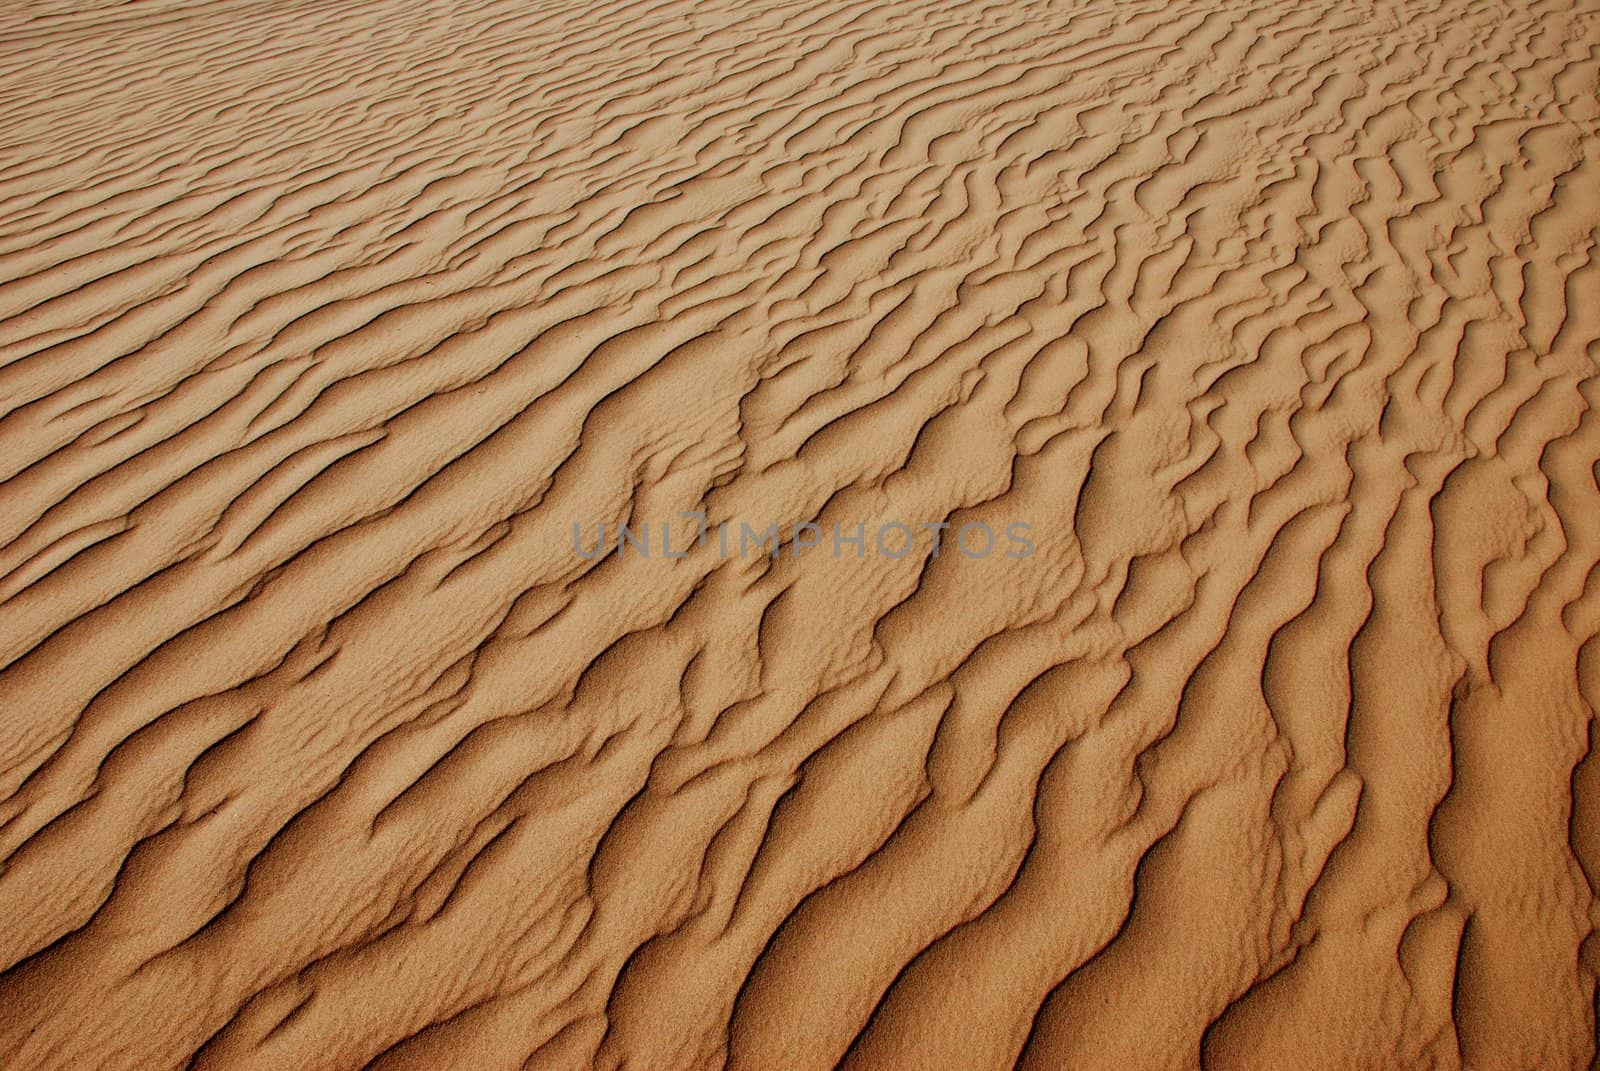 Endless Sea of Sand by pixelsnap